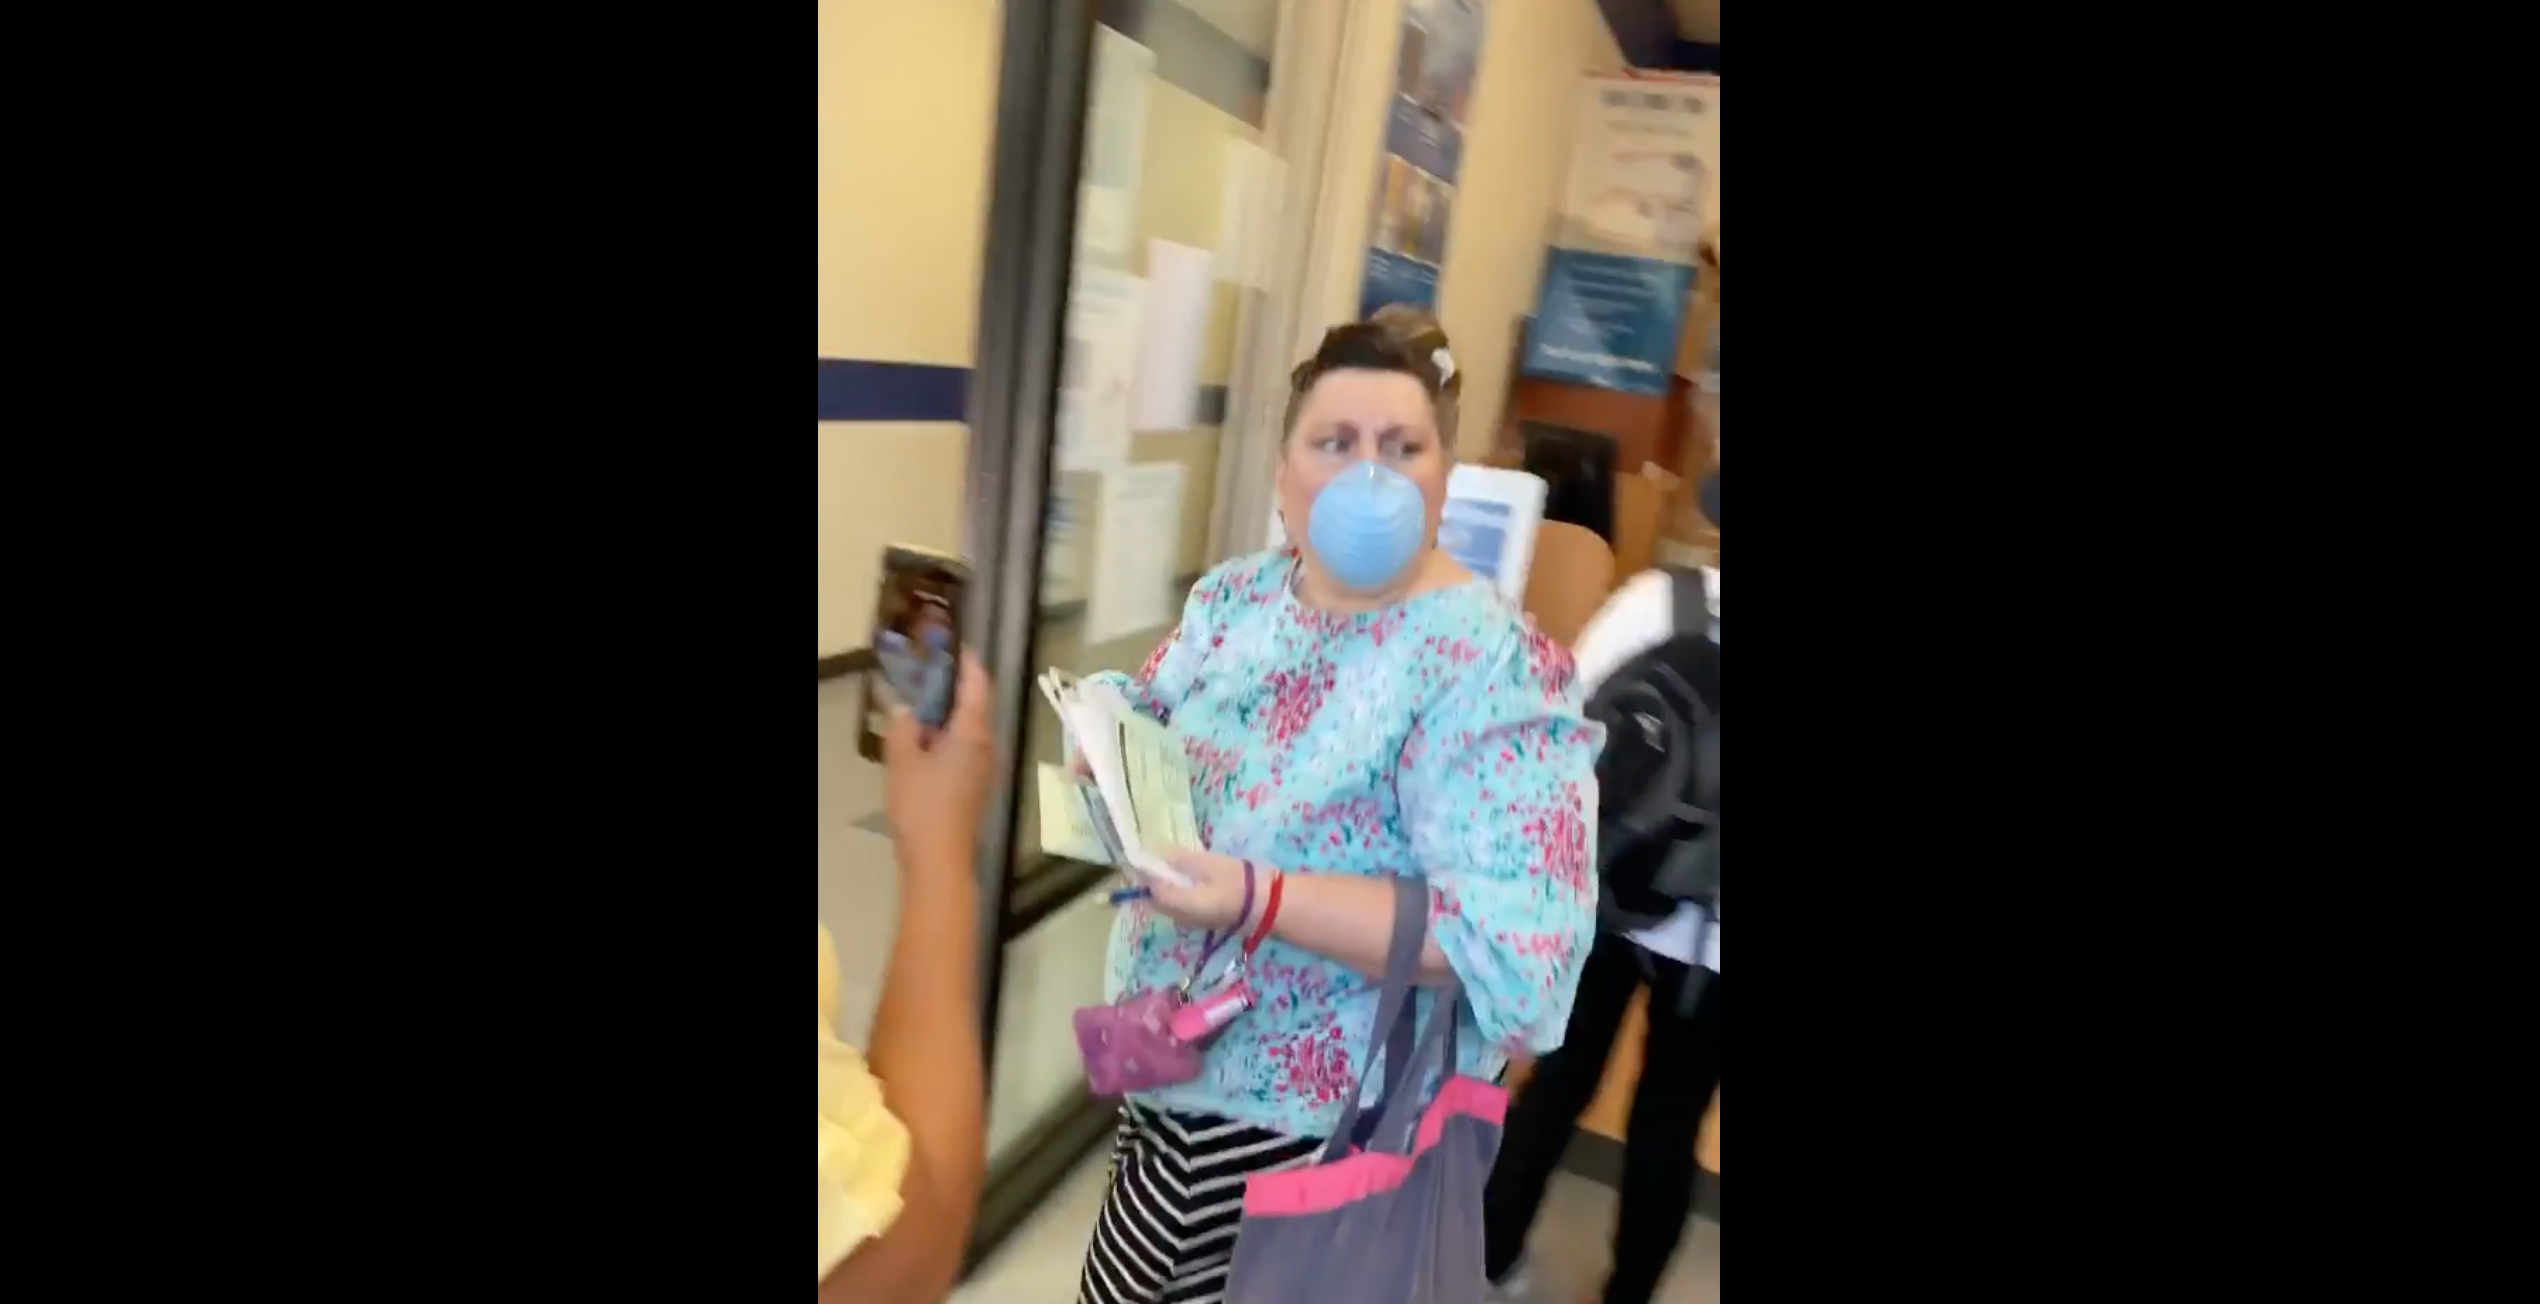 PHOTO: A woman was caught on camera using racial slurs at a post office on Main Street in Los Altos, July 23, 2020.